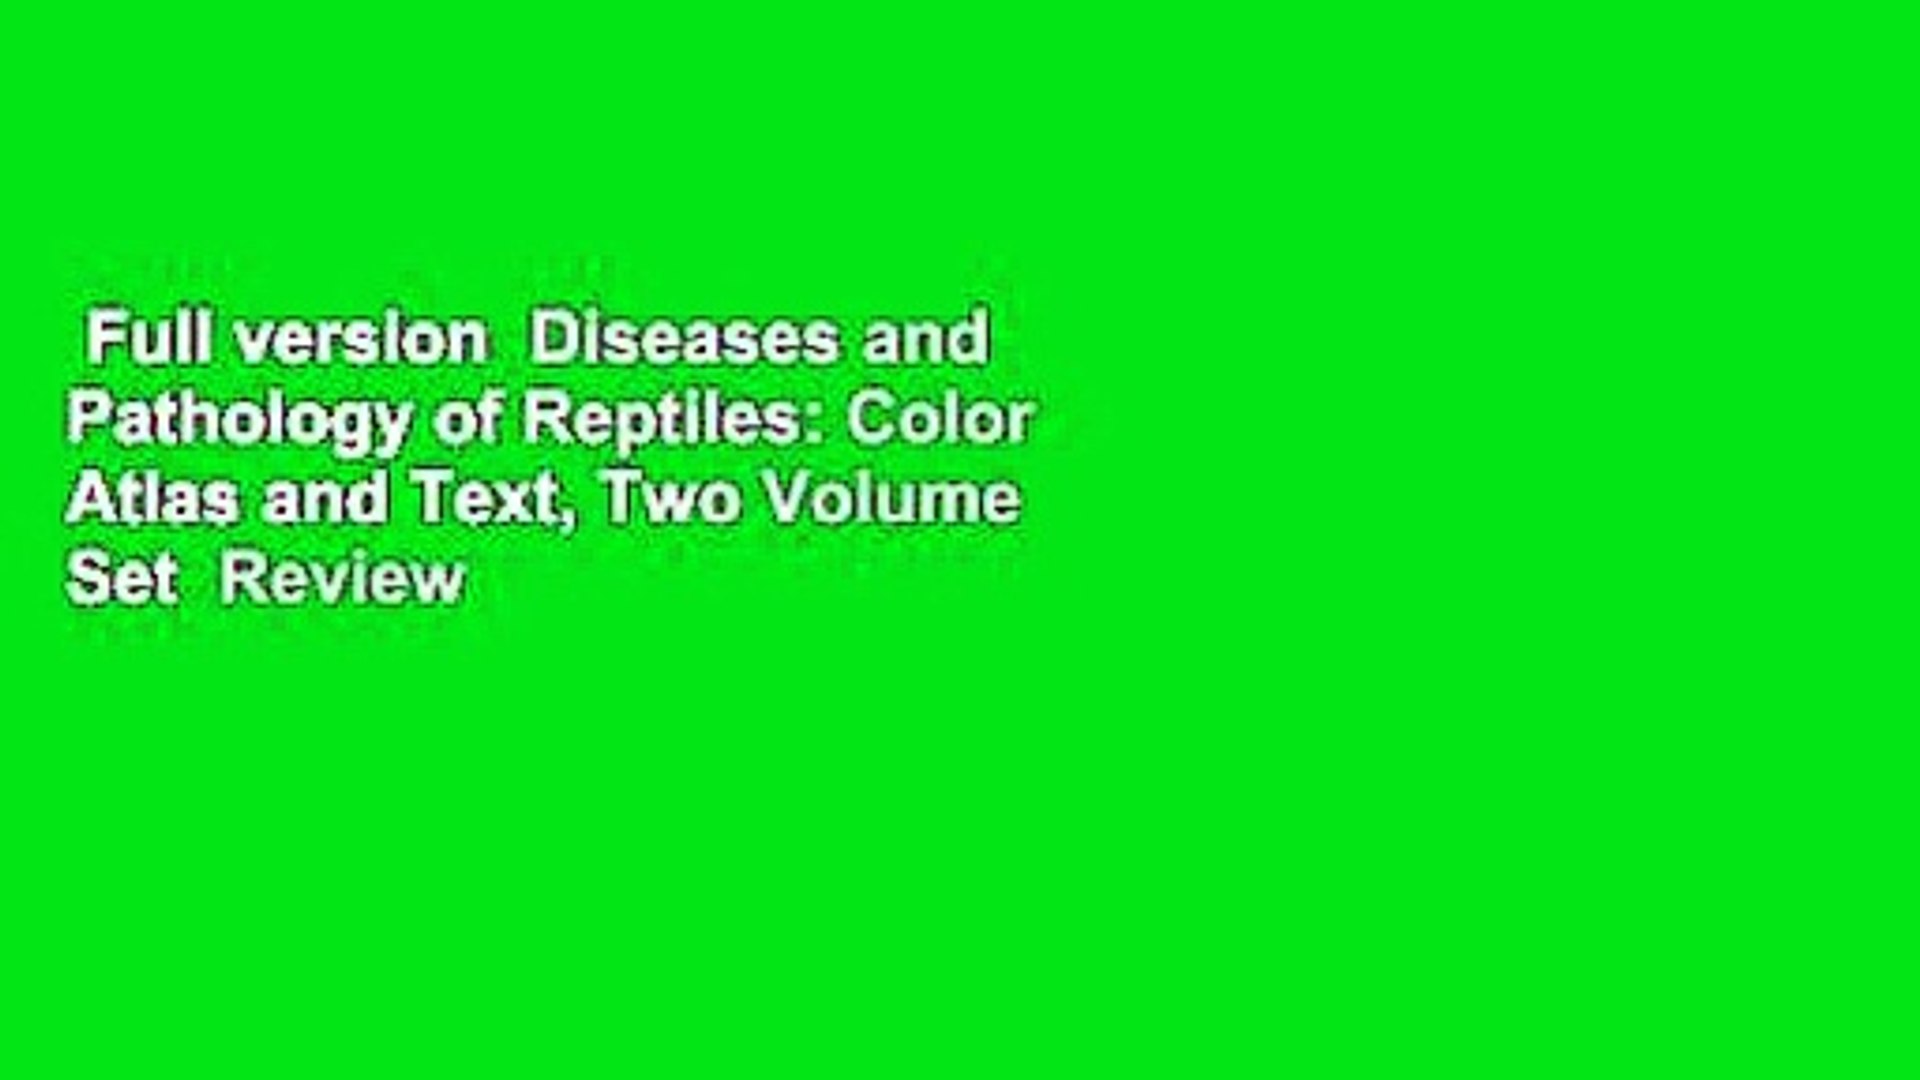 Full version  Diseases and Pathology of Reptiles: Color Atlas and Text, Two Volume Set  Review